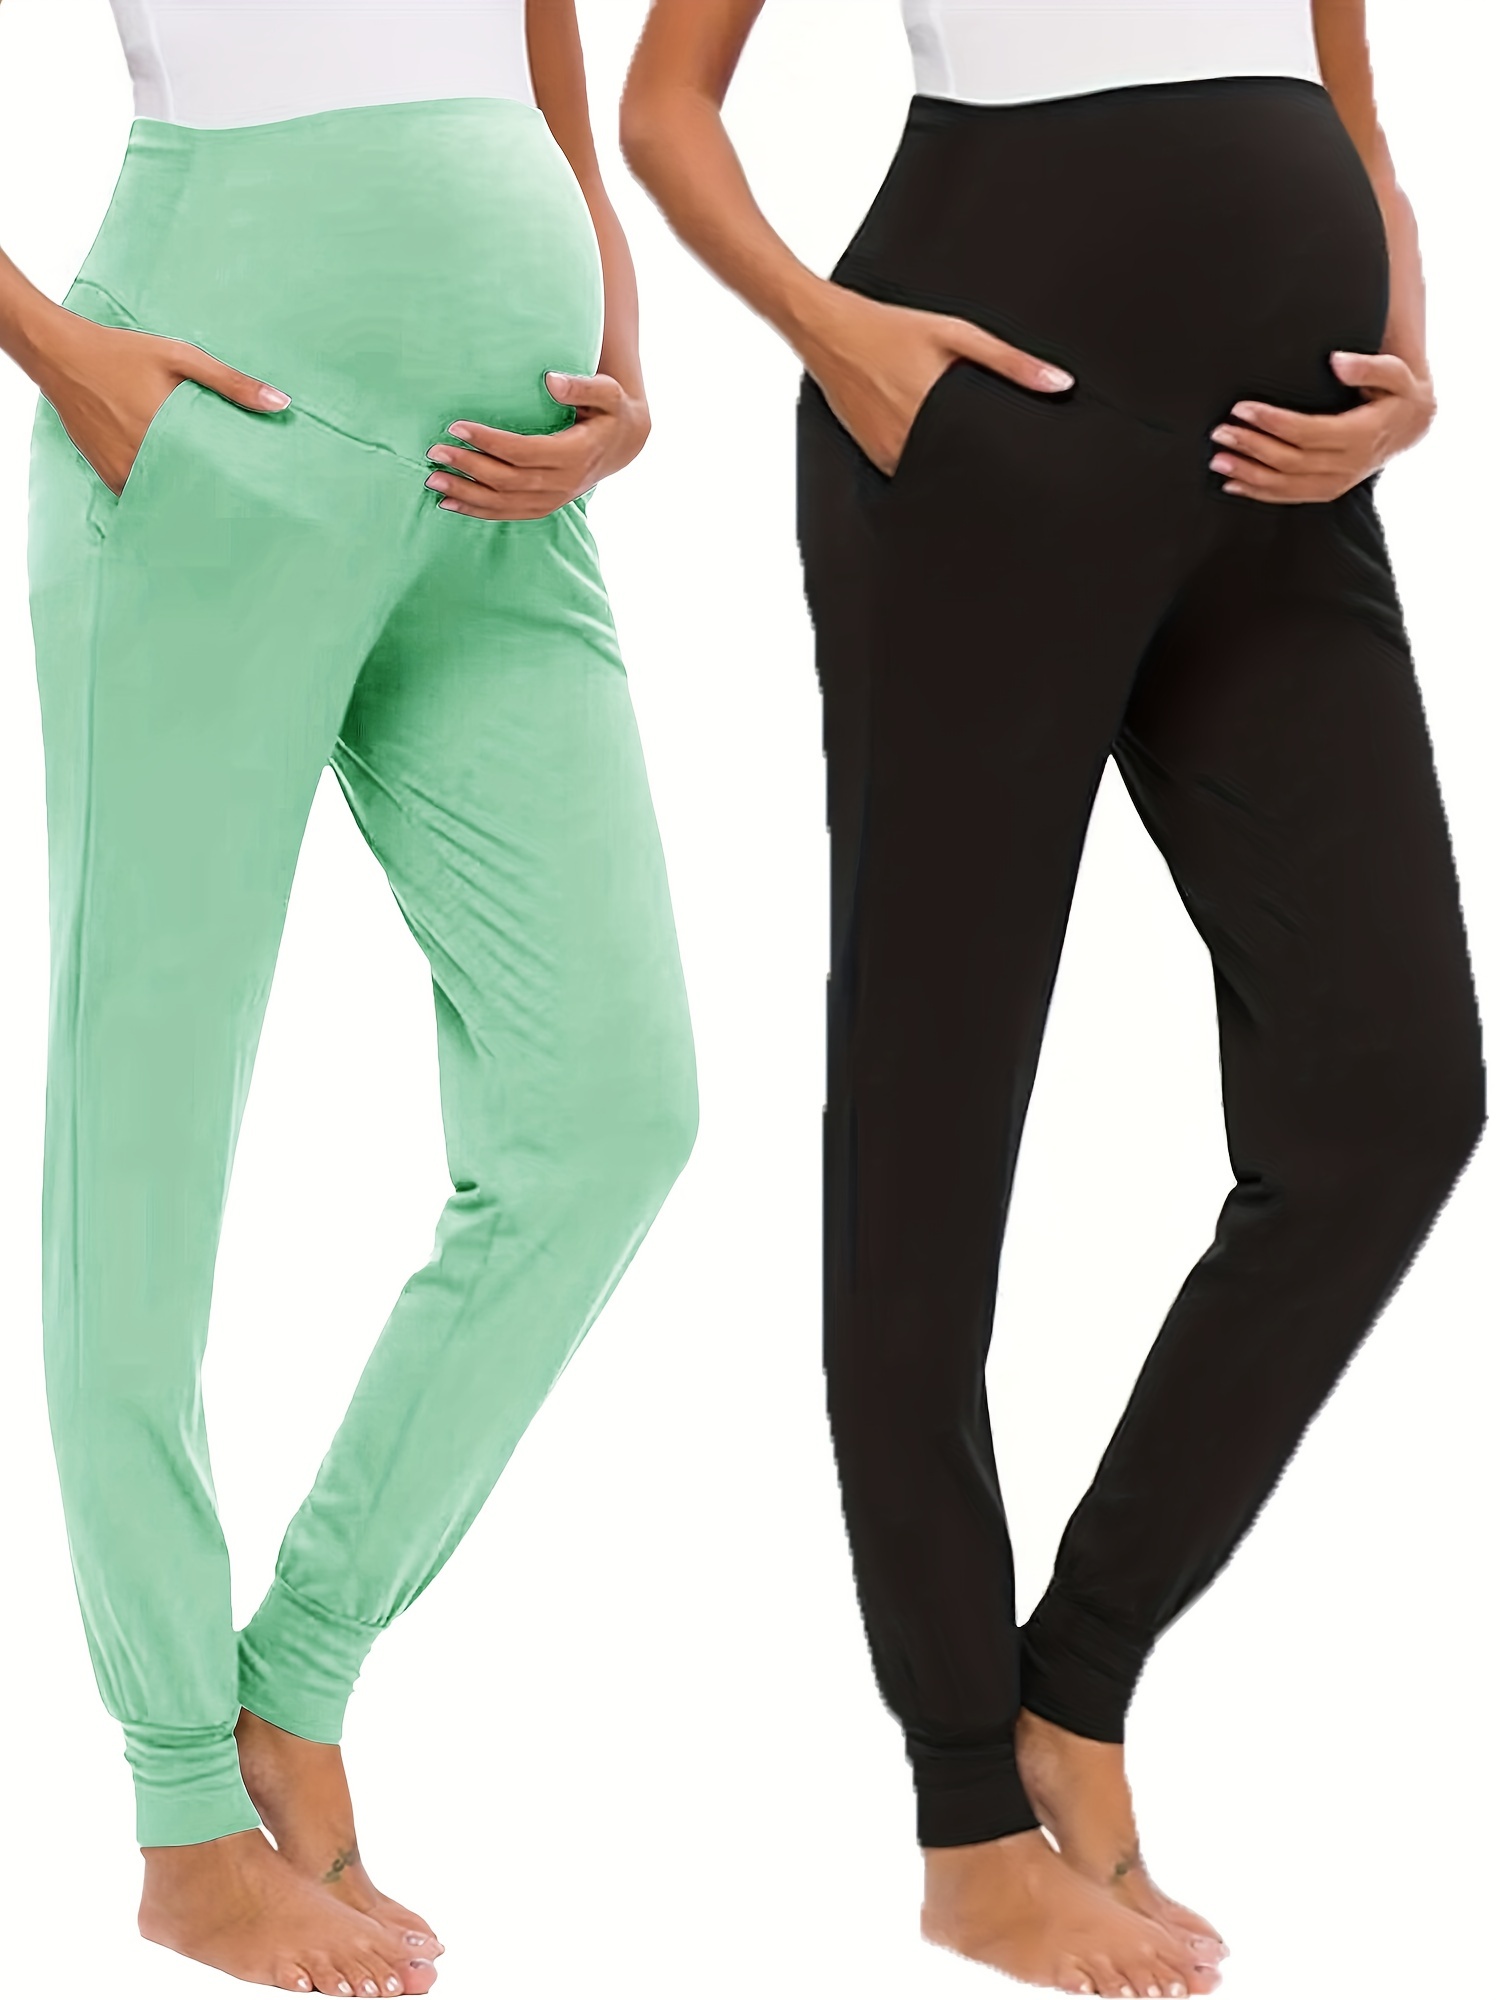 Comfy Stretchy High Waist Tummy Support Maternity Sweatpants